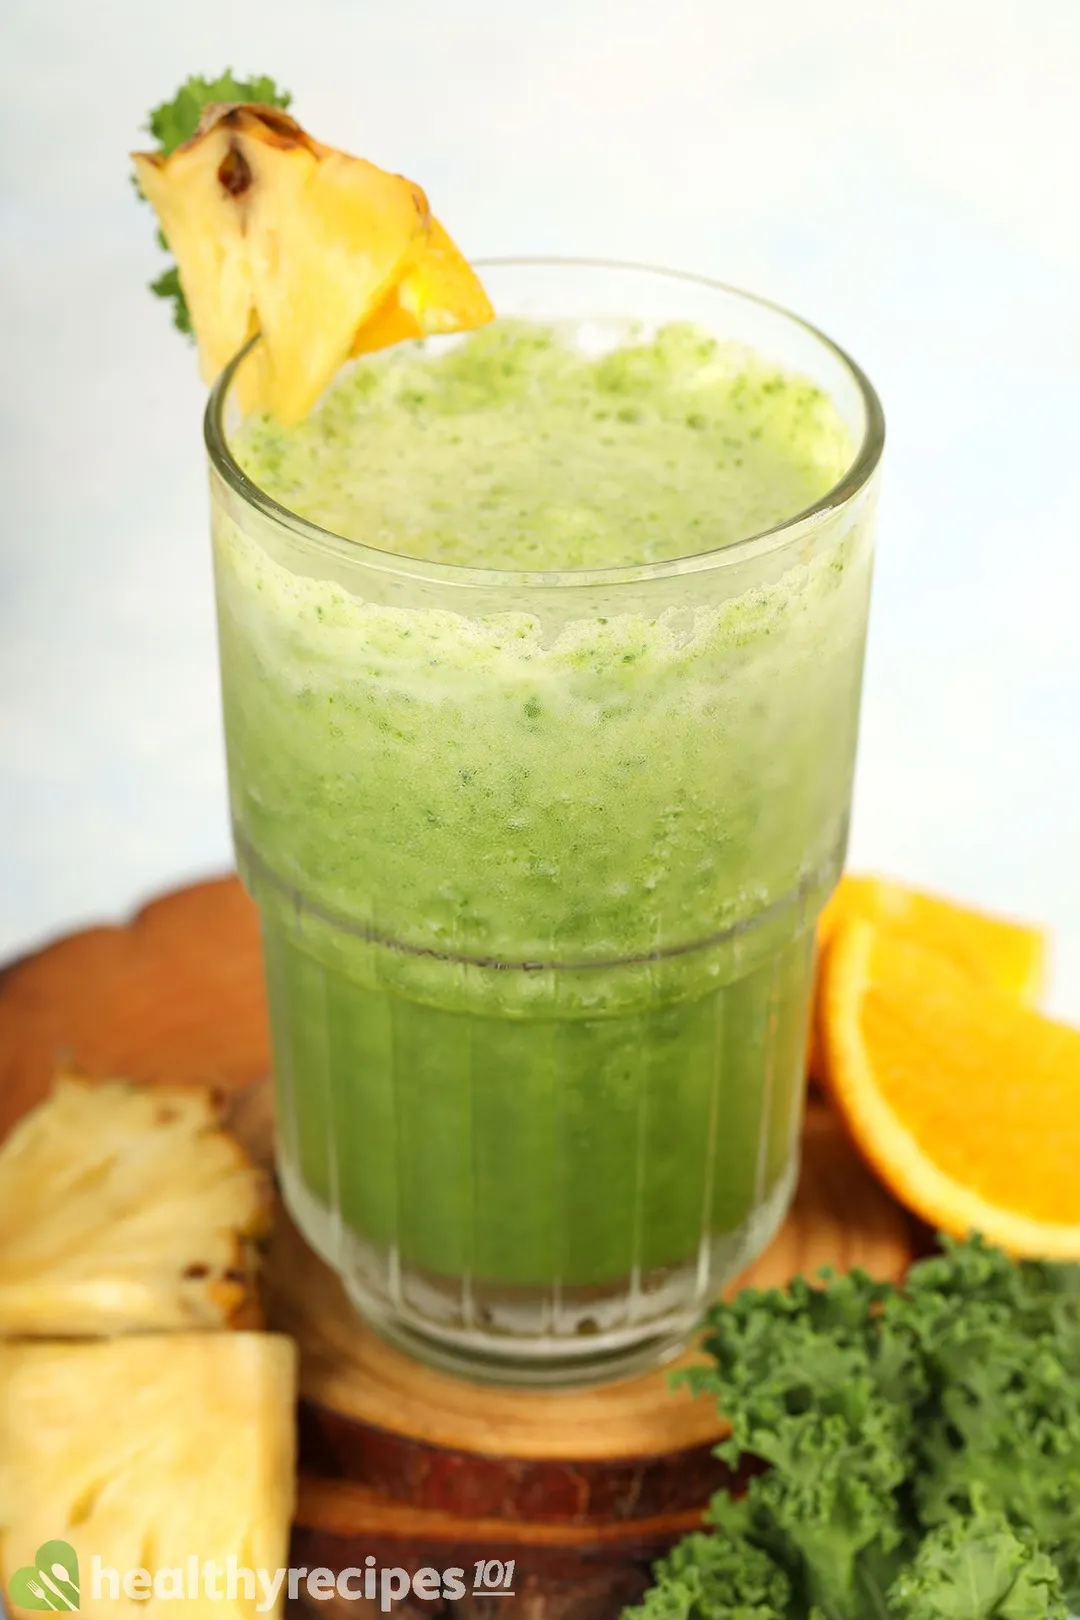 A glass of Pineapple Kale Smoothie placed on a wooden board near orange slices, pineapple triangles, and kale.